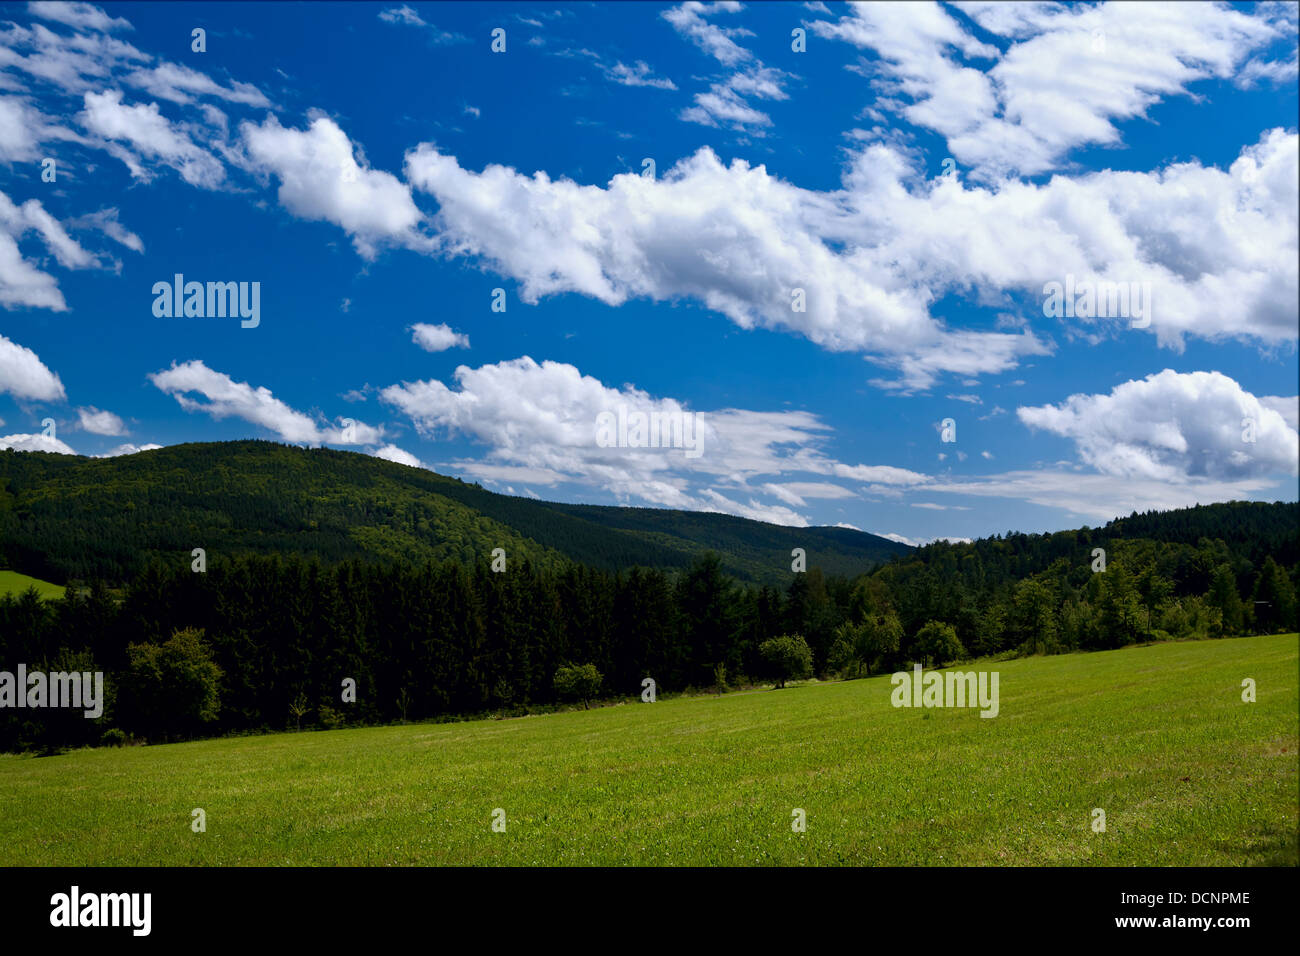 summer mountains covered with green forests Stock Photo